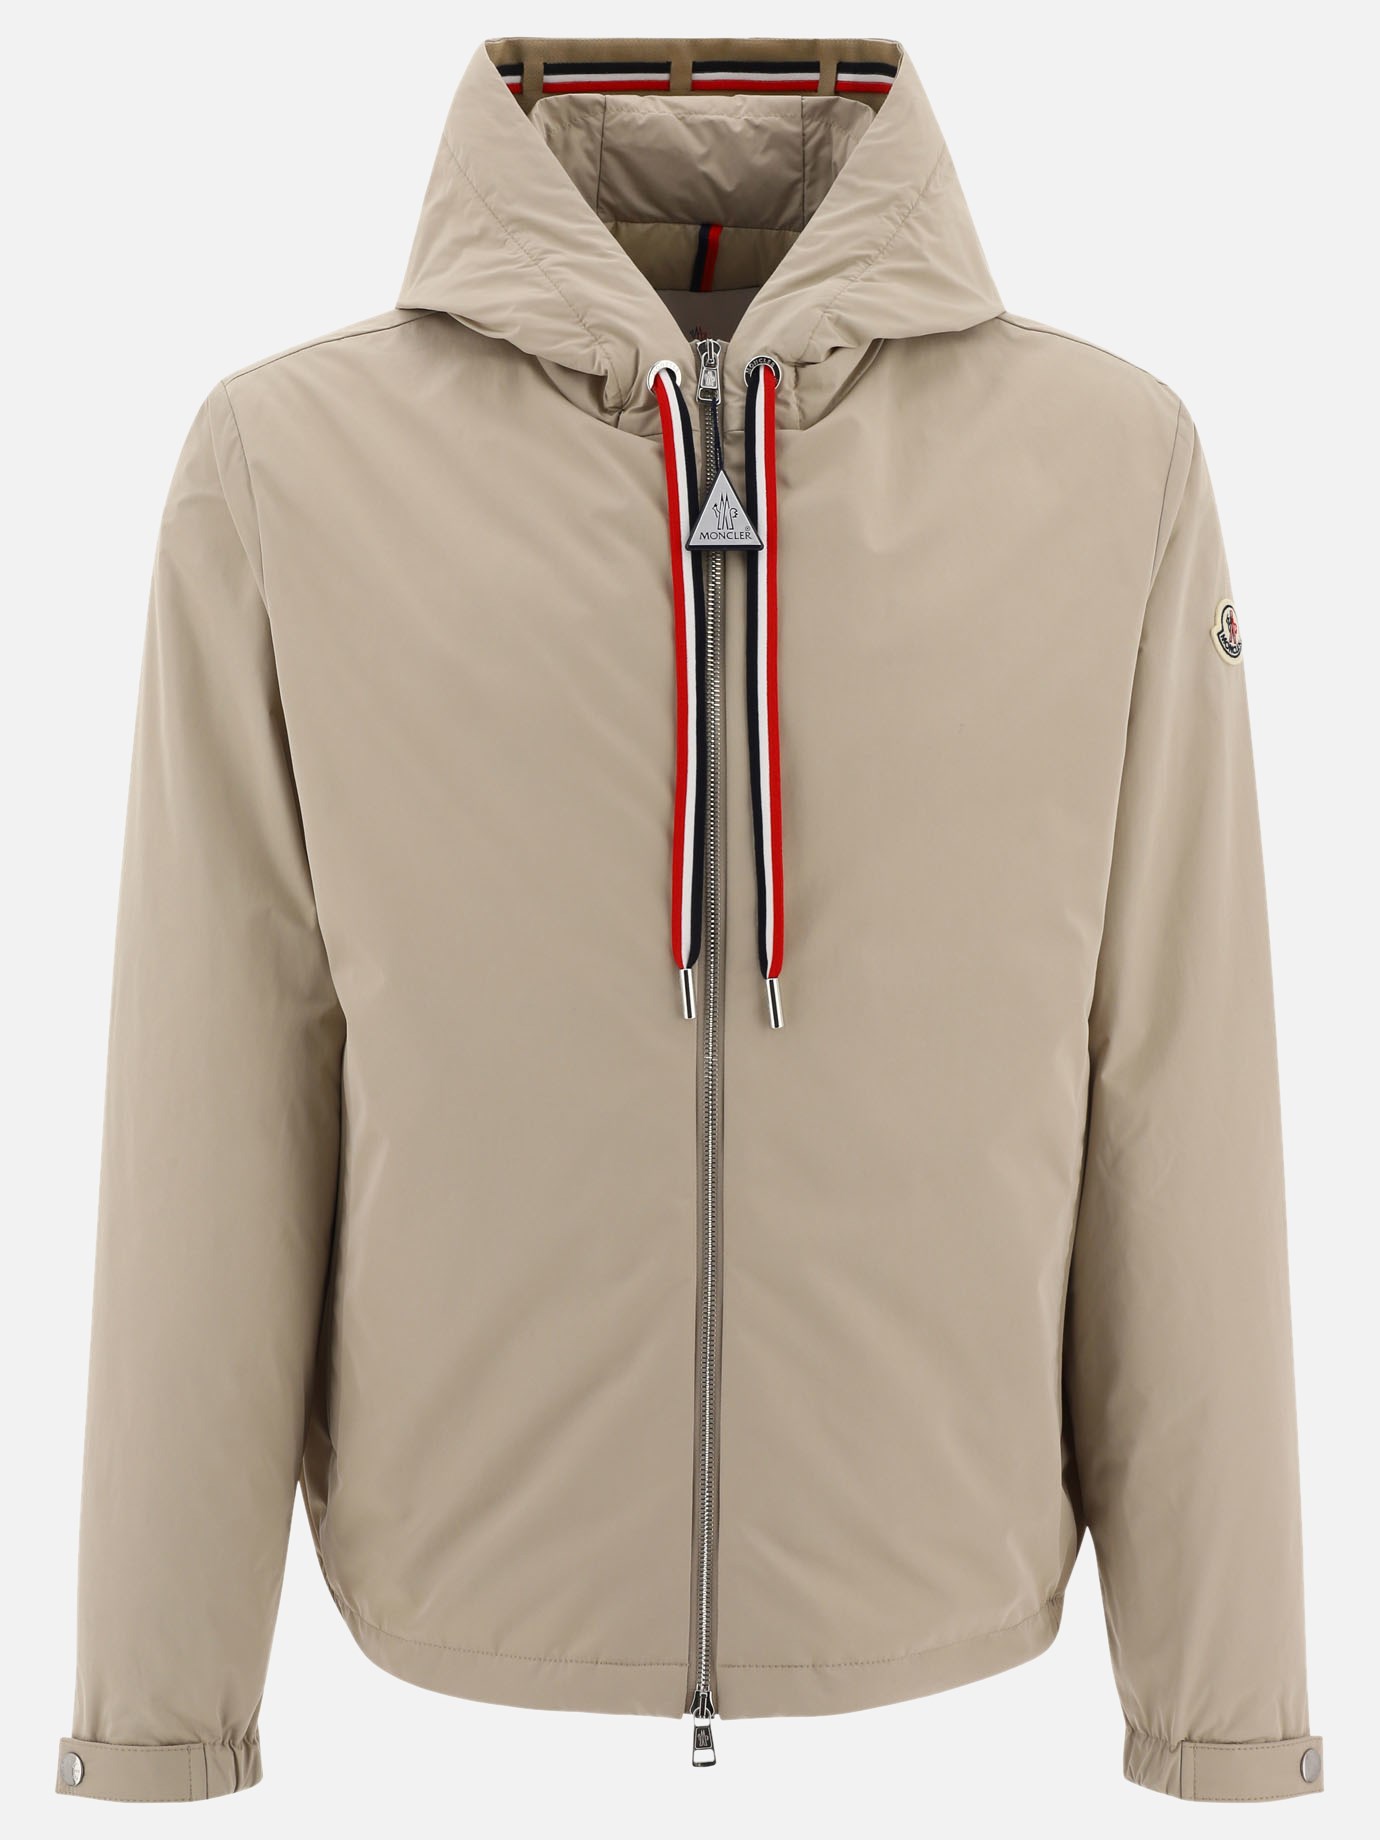 Piumino  Cerou  by Moncler